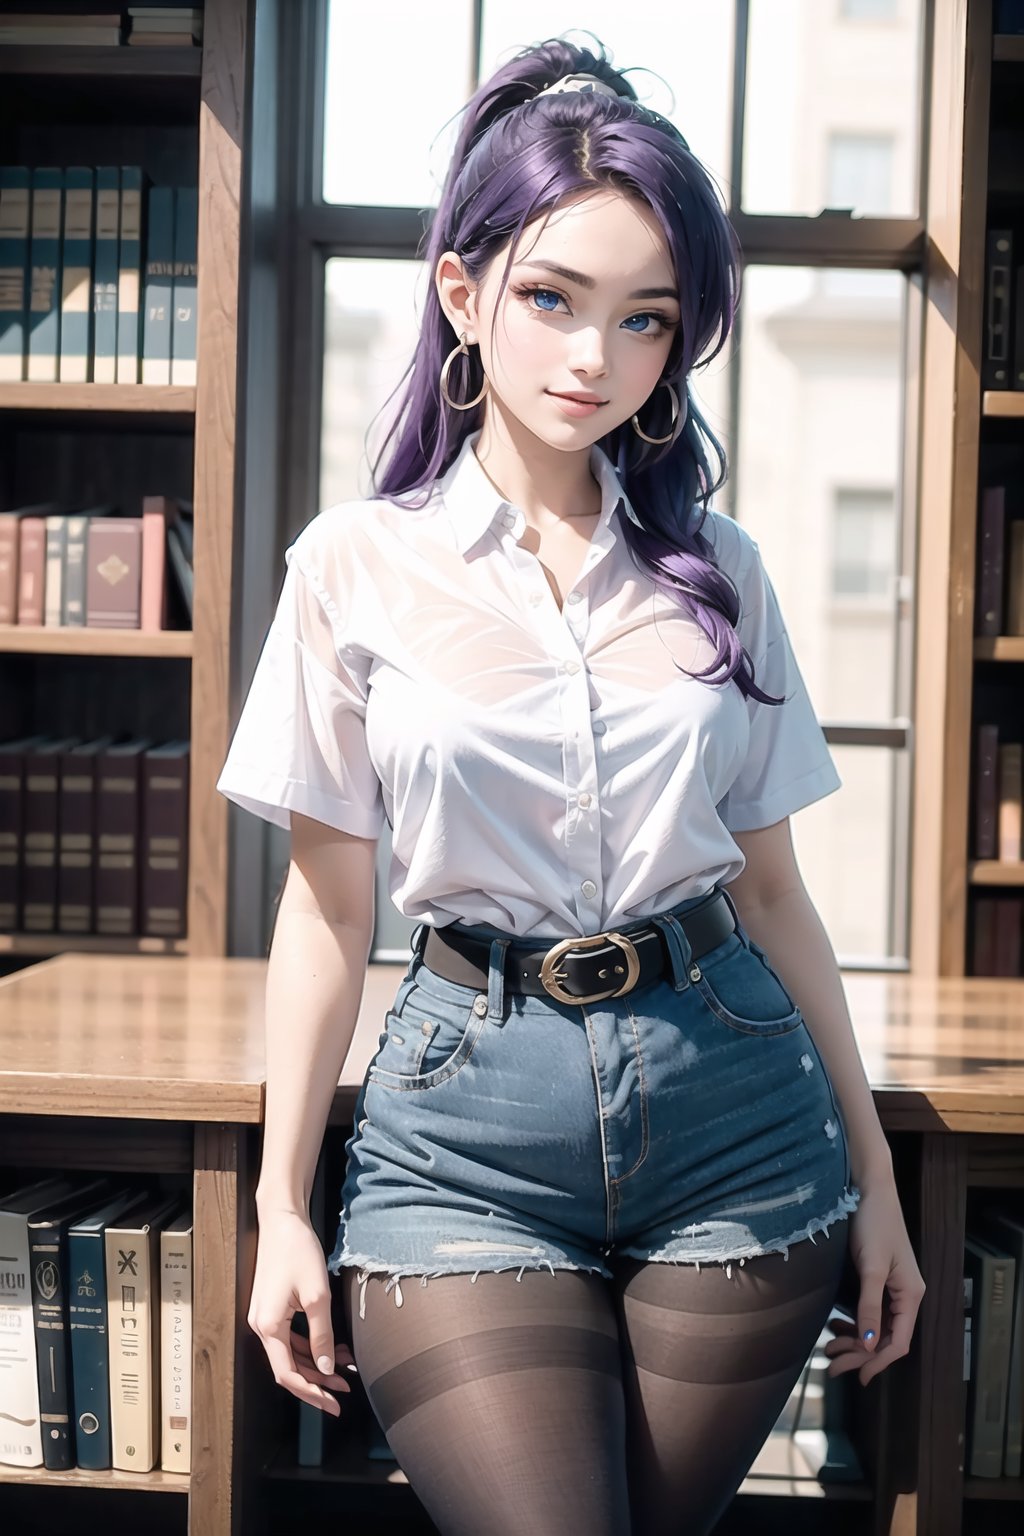 A close-up shot of a stunning young woman with vibrant purple hair styled in a ponytail and frilled hair band, her piercing blue eyes half-opened as she gazes directly at the viewer. She stands confidently inside a cozy library setting, wearing a crisp white button-down shirt with short sleeves, paired with high-waisted blue shorts and a black belt. Her curves are accentuated by brown pantyhose, showcasing her impressive figure. A warm smile plays on her lips as she poses, radiating confidence and charm.